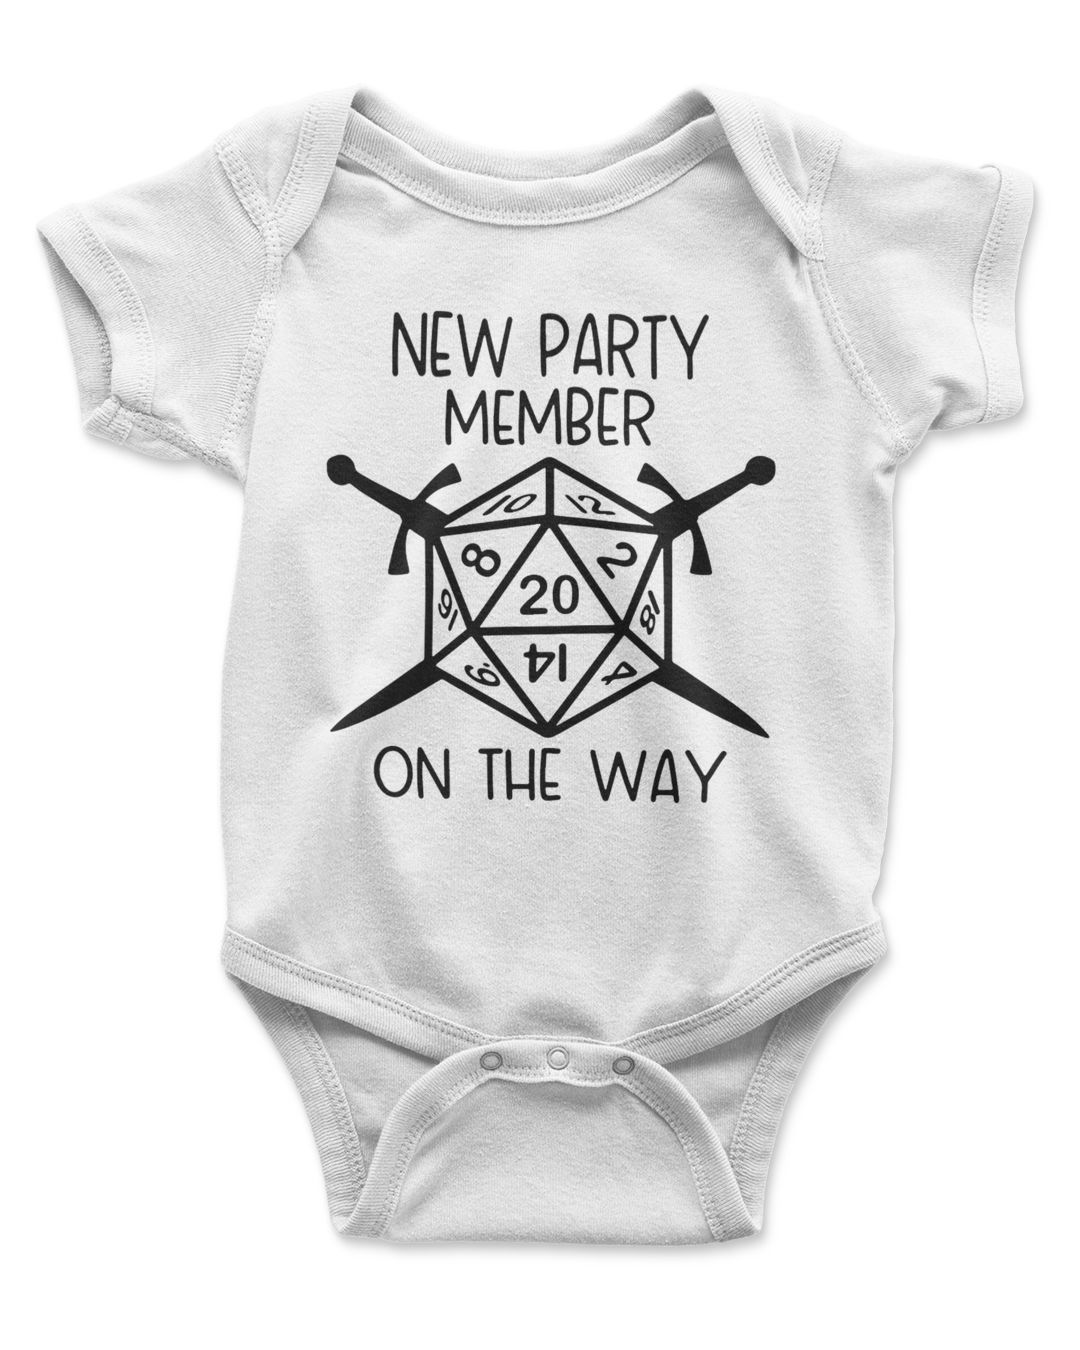 New Party Member On The Way, Baby DnD, Dungeons and Dragons, DnD, RPG ...